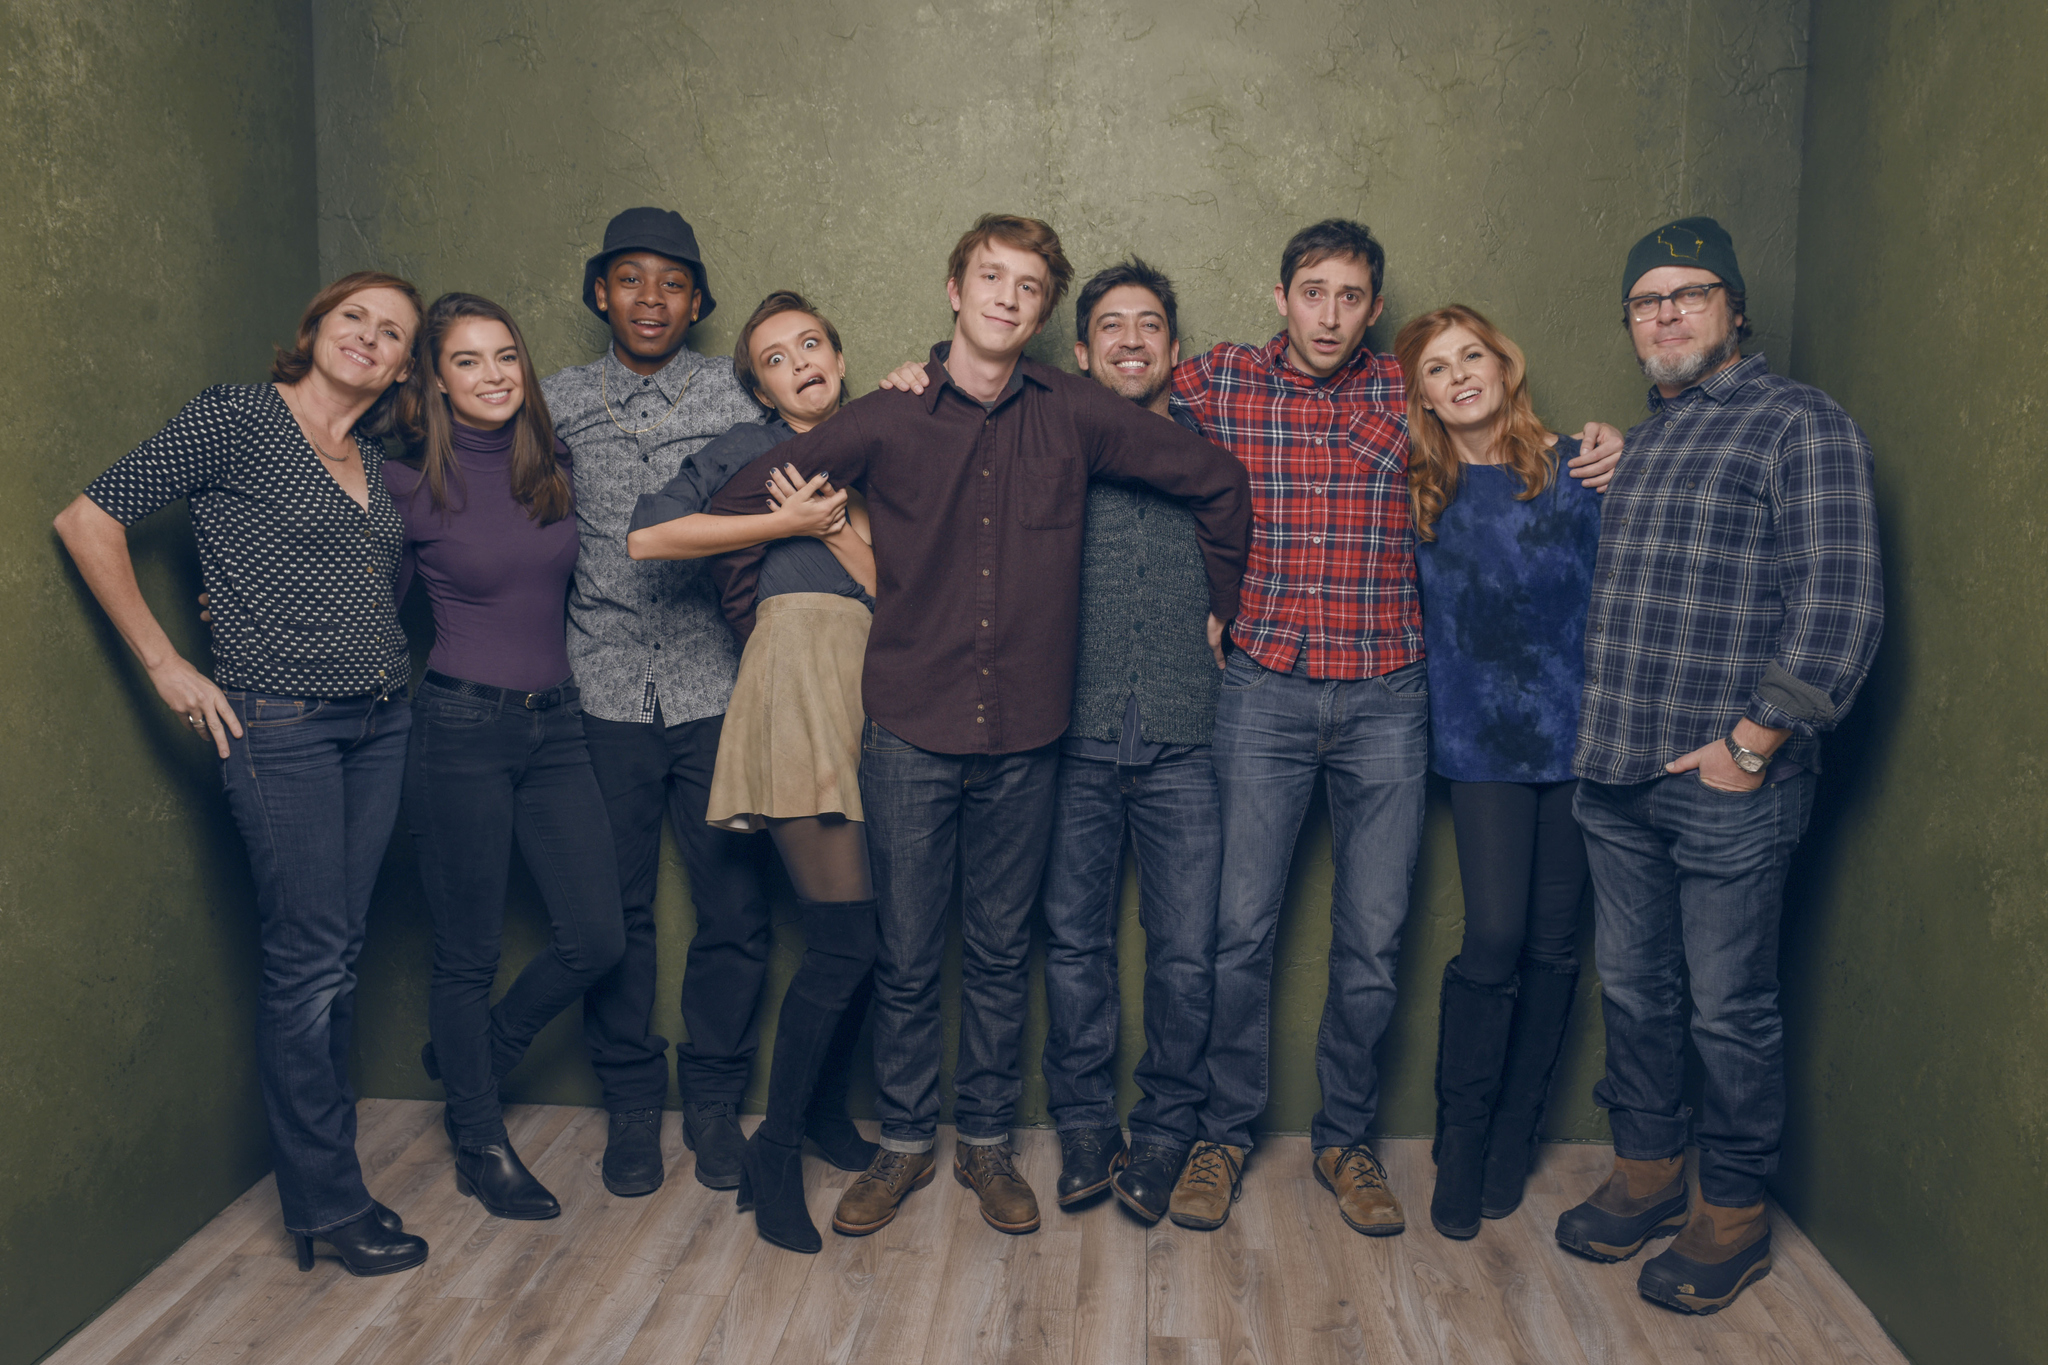 Alfonso Gomez-Rejon, Connie Britton, Nick Offerman, Molly Shannon, Thomas Mann, Katherine C. Hughes, Olivia Cooke, Jesse Andrews and RJ Cyler